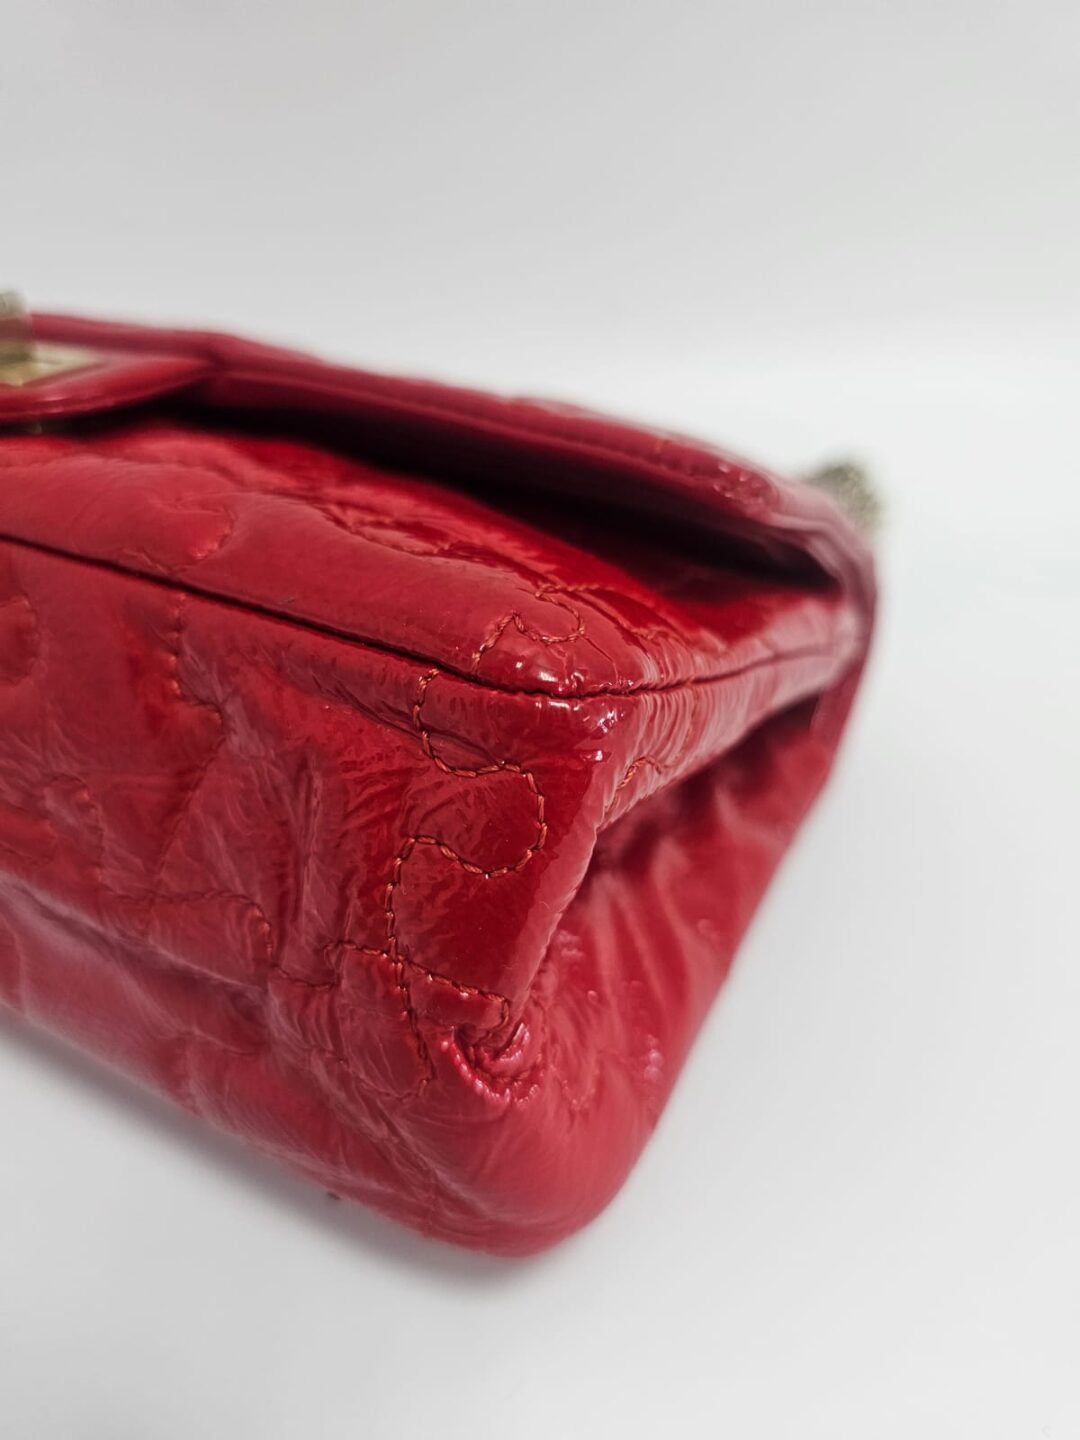 Chanel Red Puzzle Patent Leather Reissue 2.55 Classic 226 Flap Bag